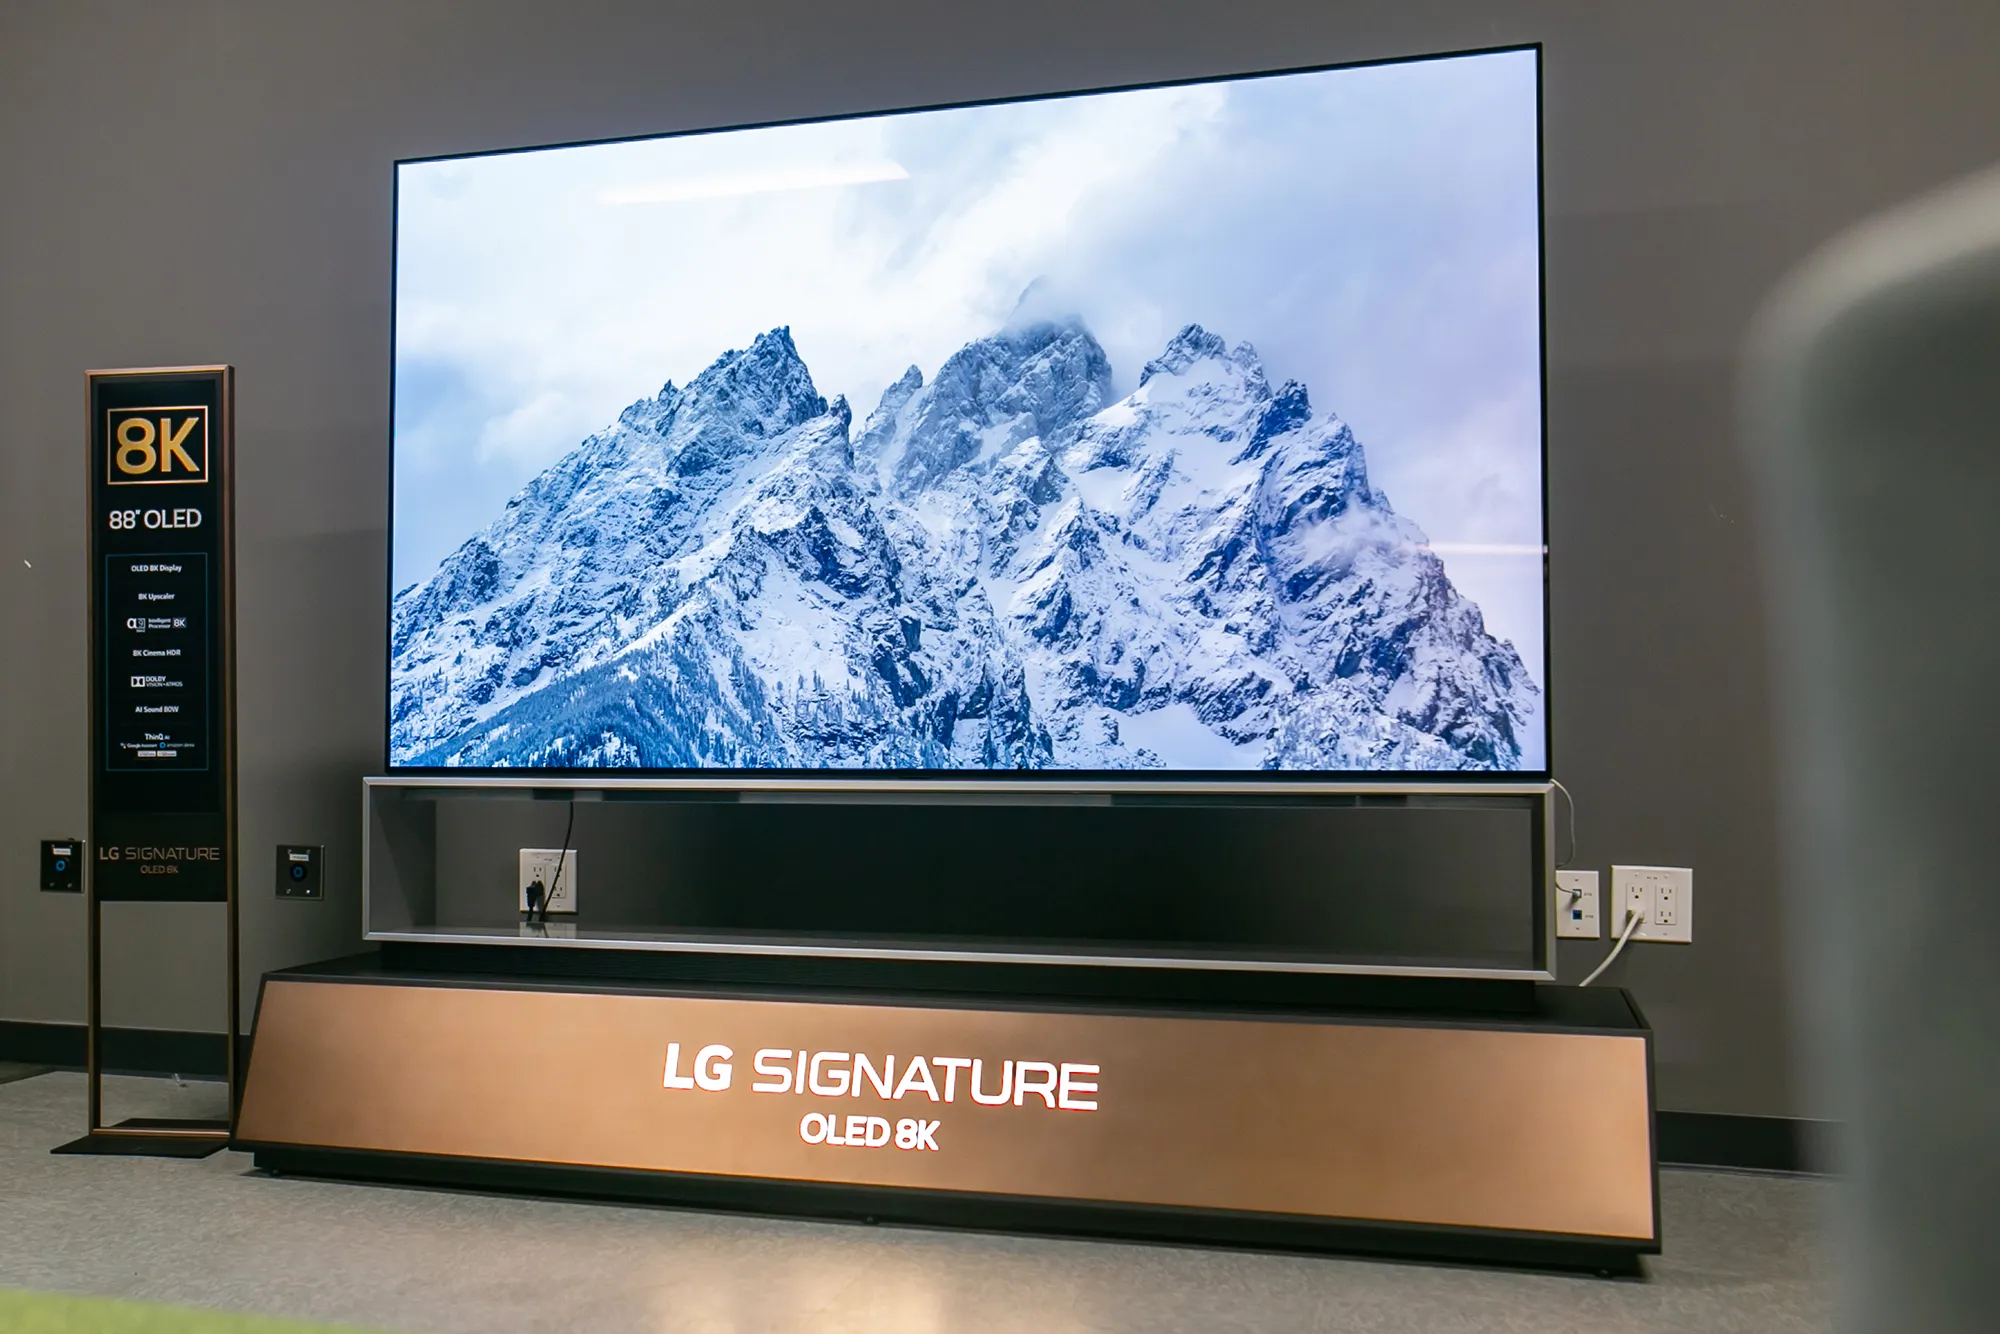 When Will LG 8K OLED TV Release